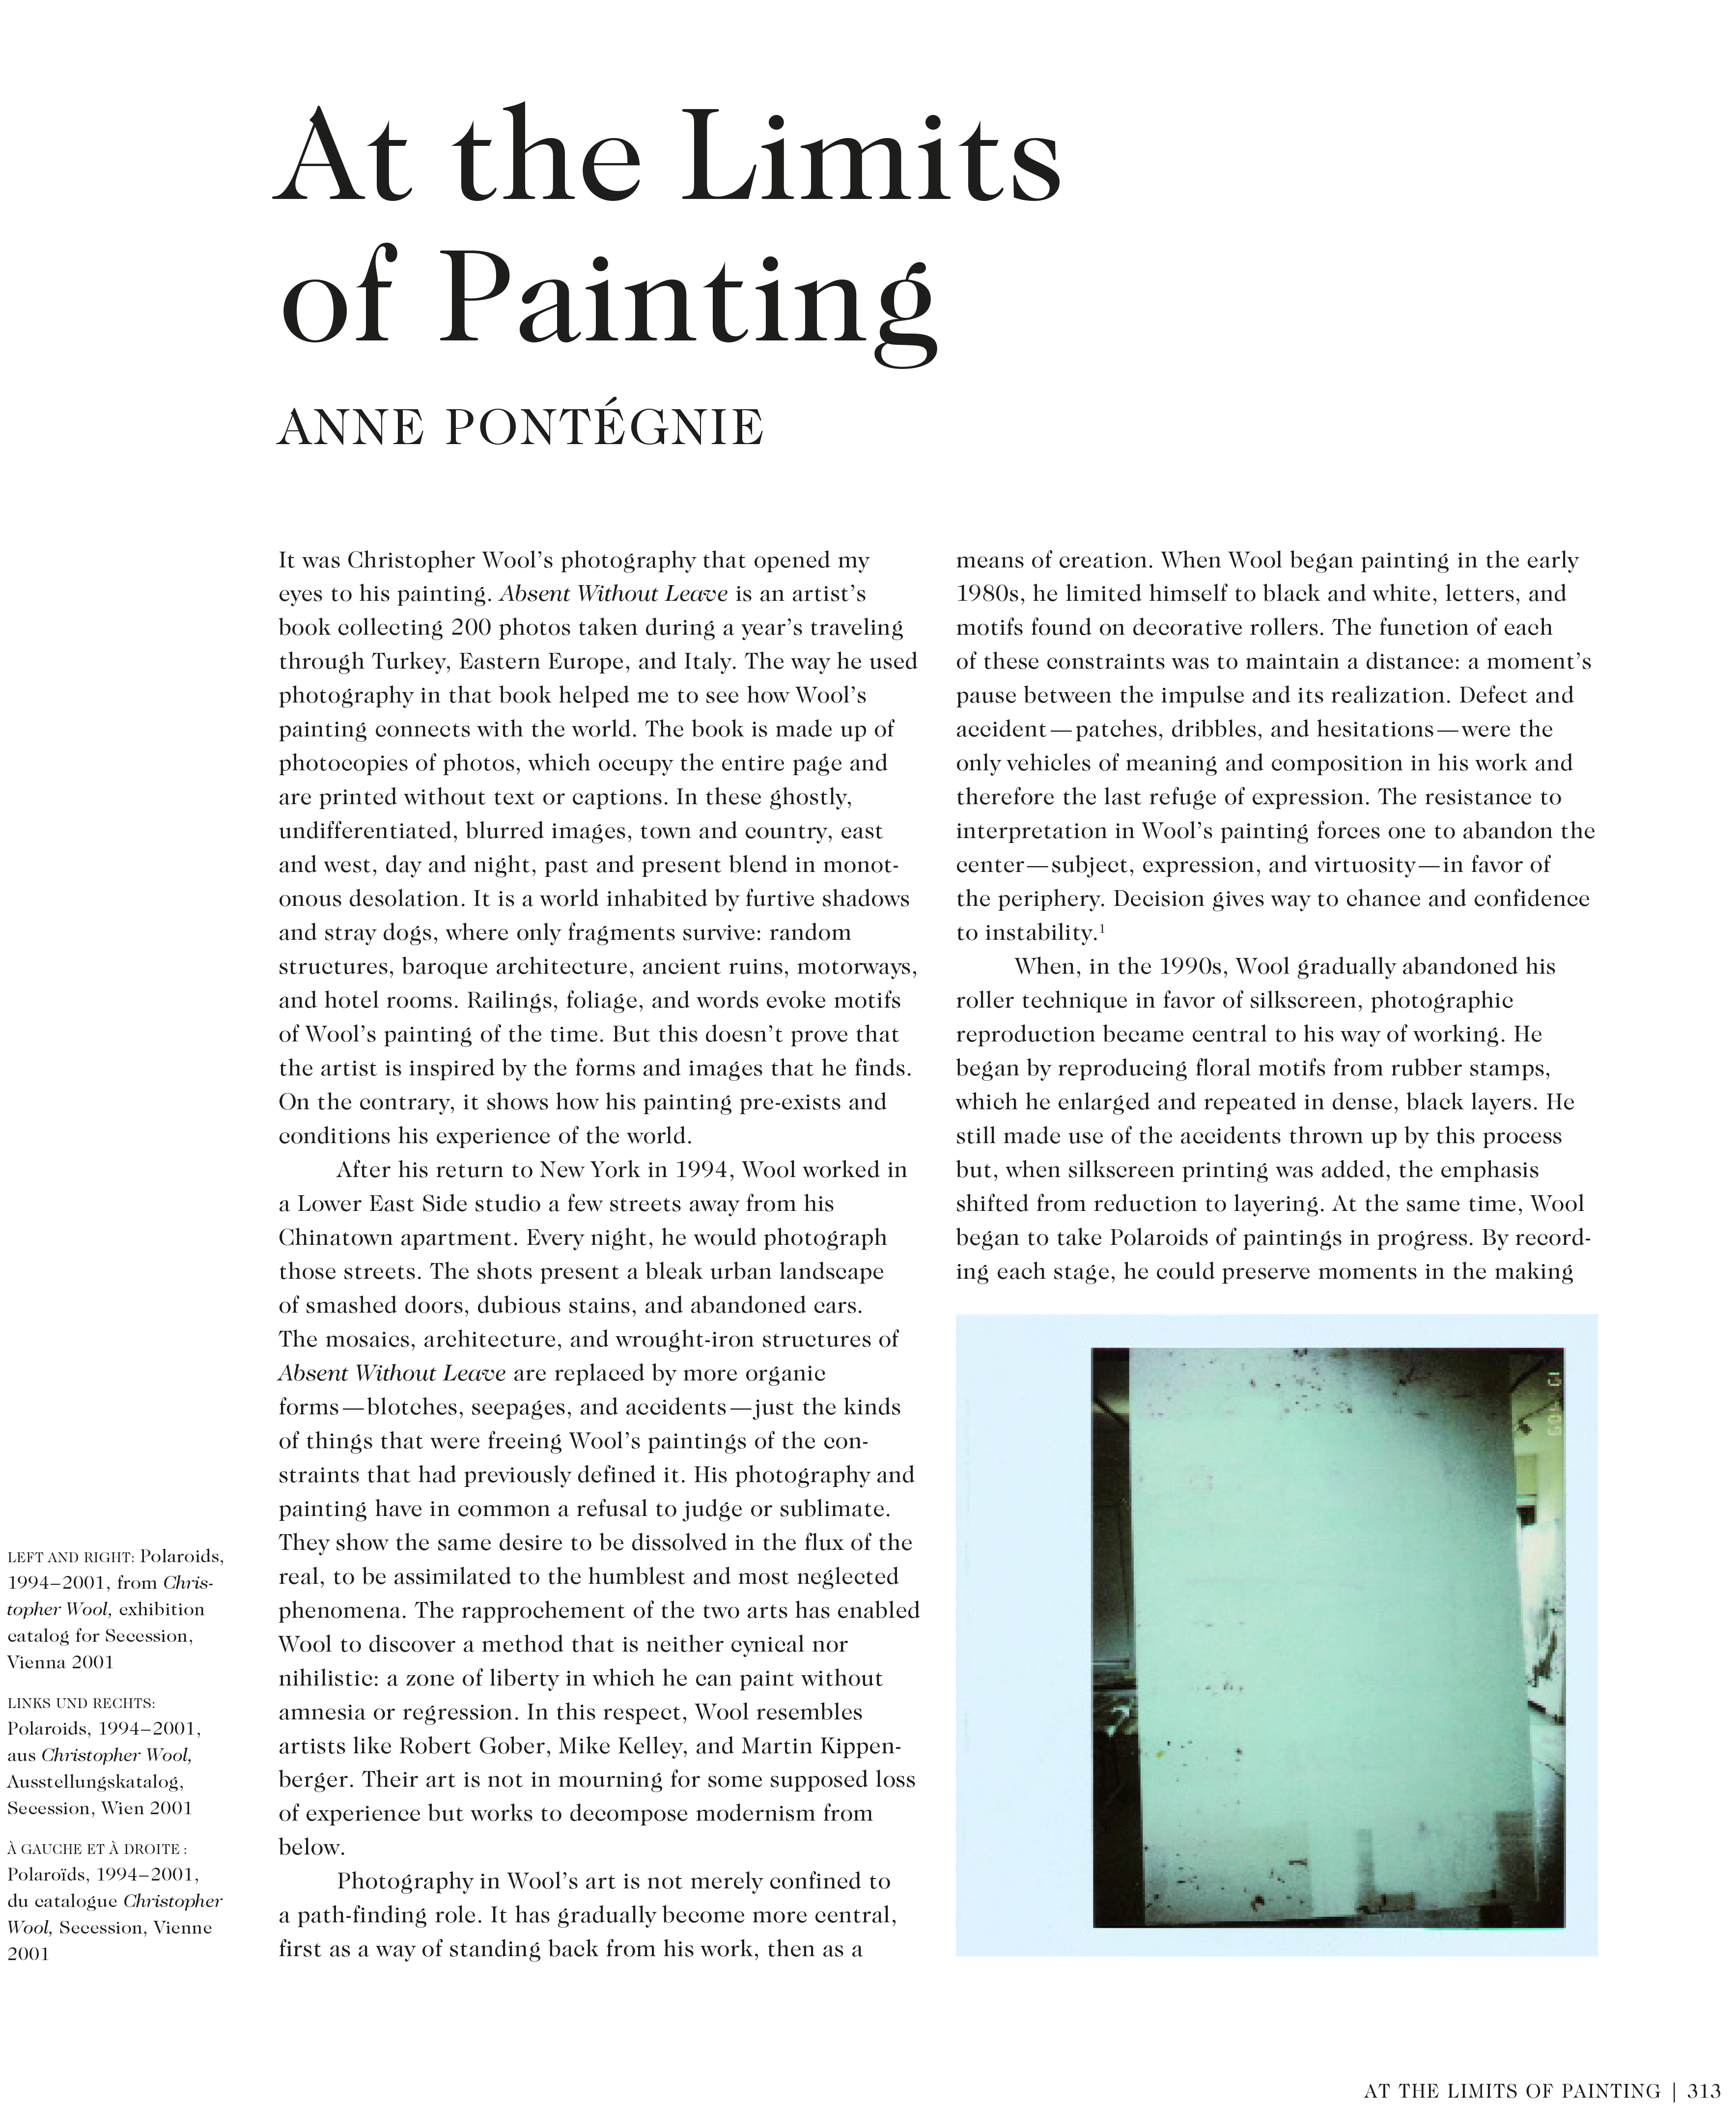 Anne Pontégnie, "At the Limits of Painting" in: "Christopher Wool". London: Taschen, 2012, p.313-322.